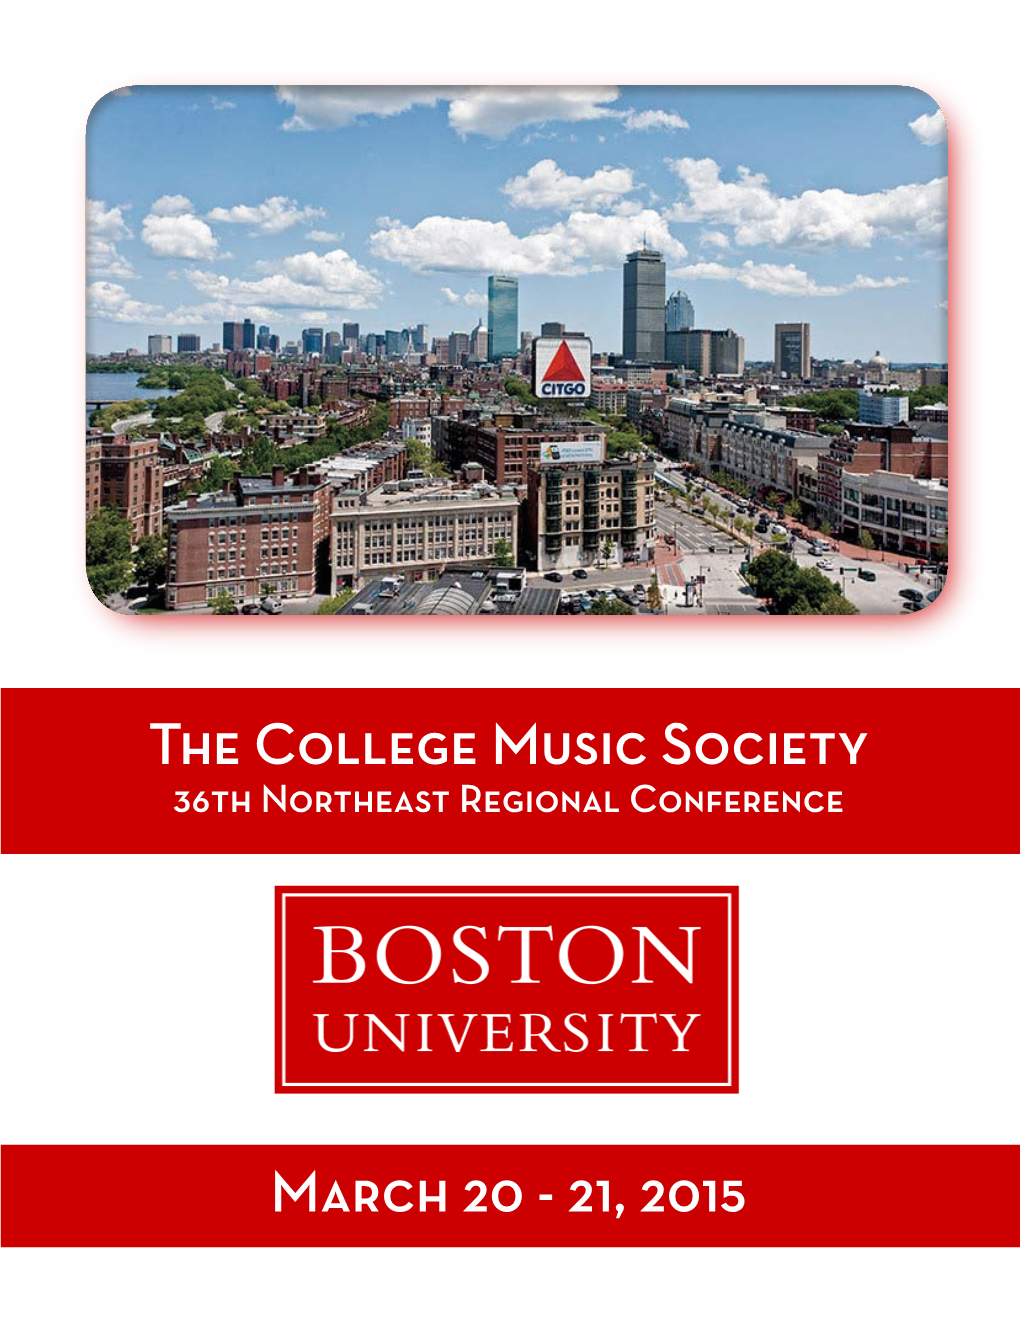 The College Music Society March 20